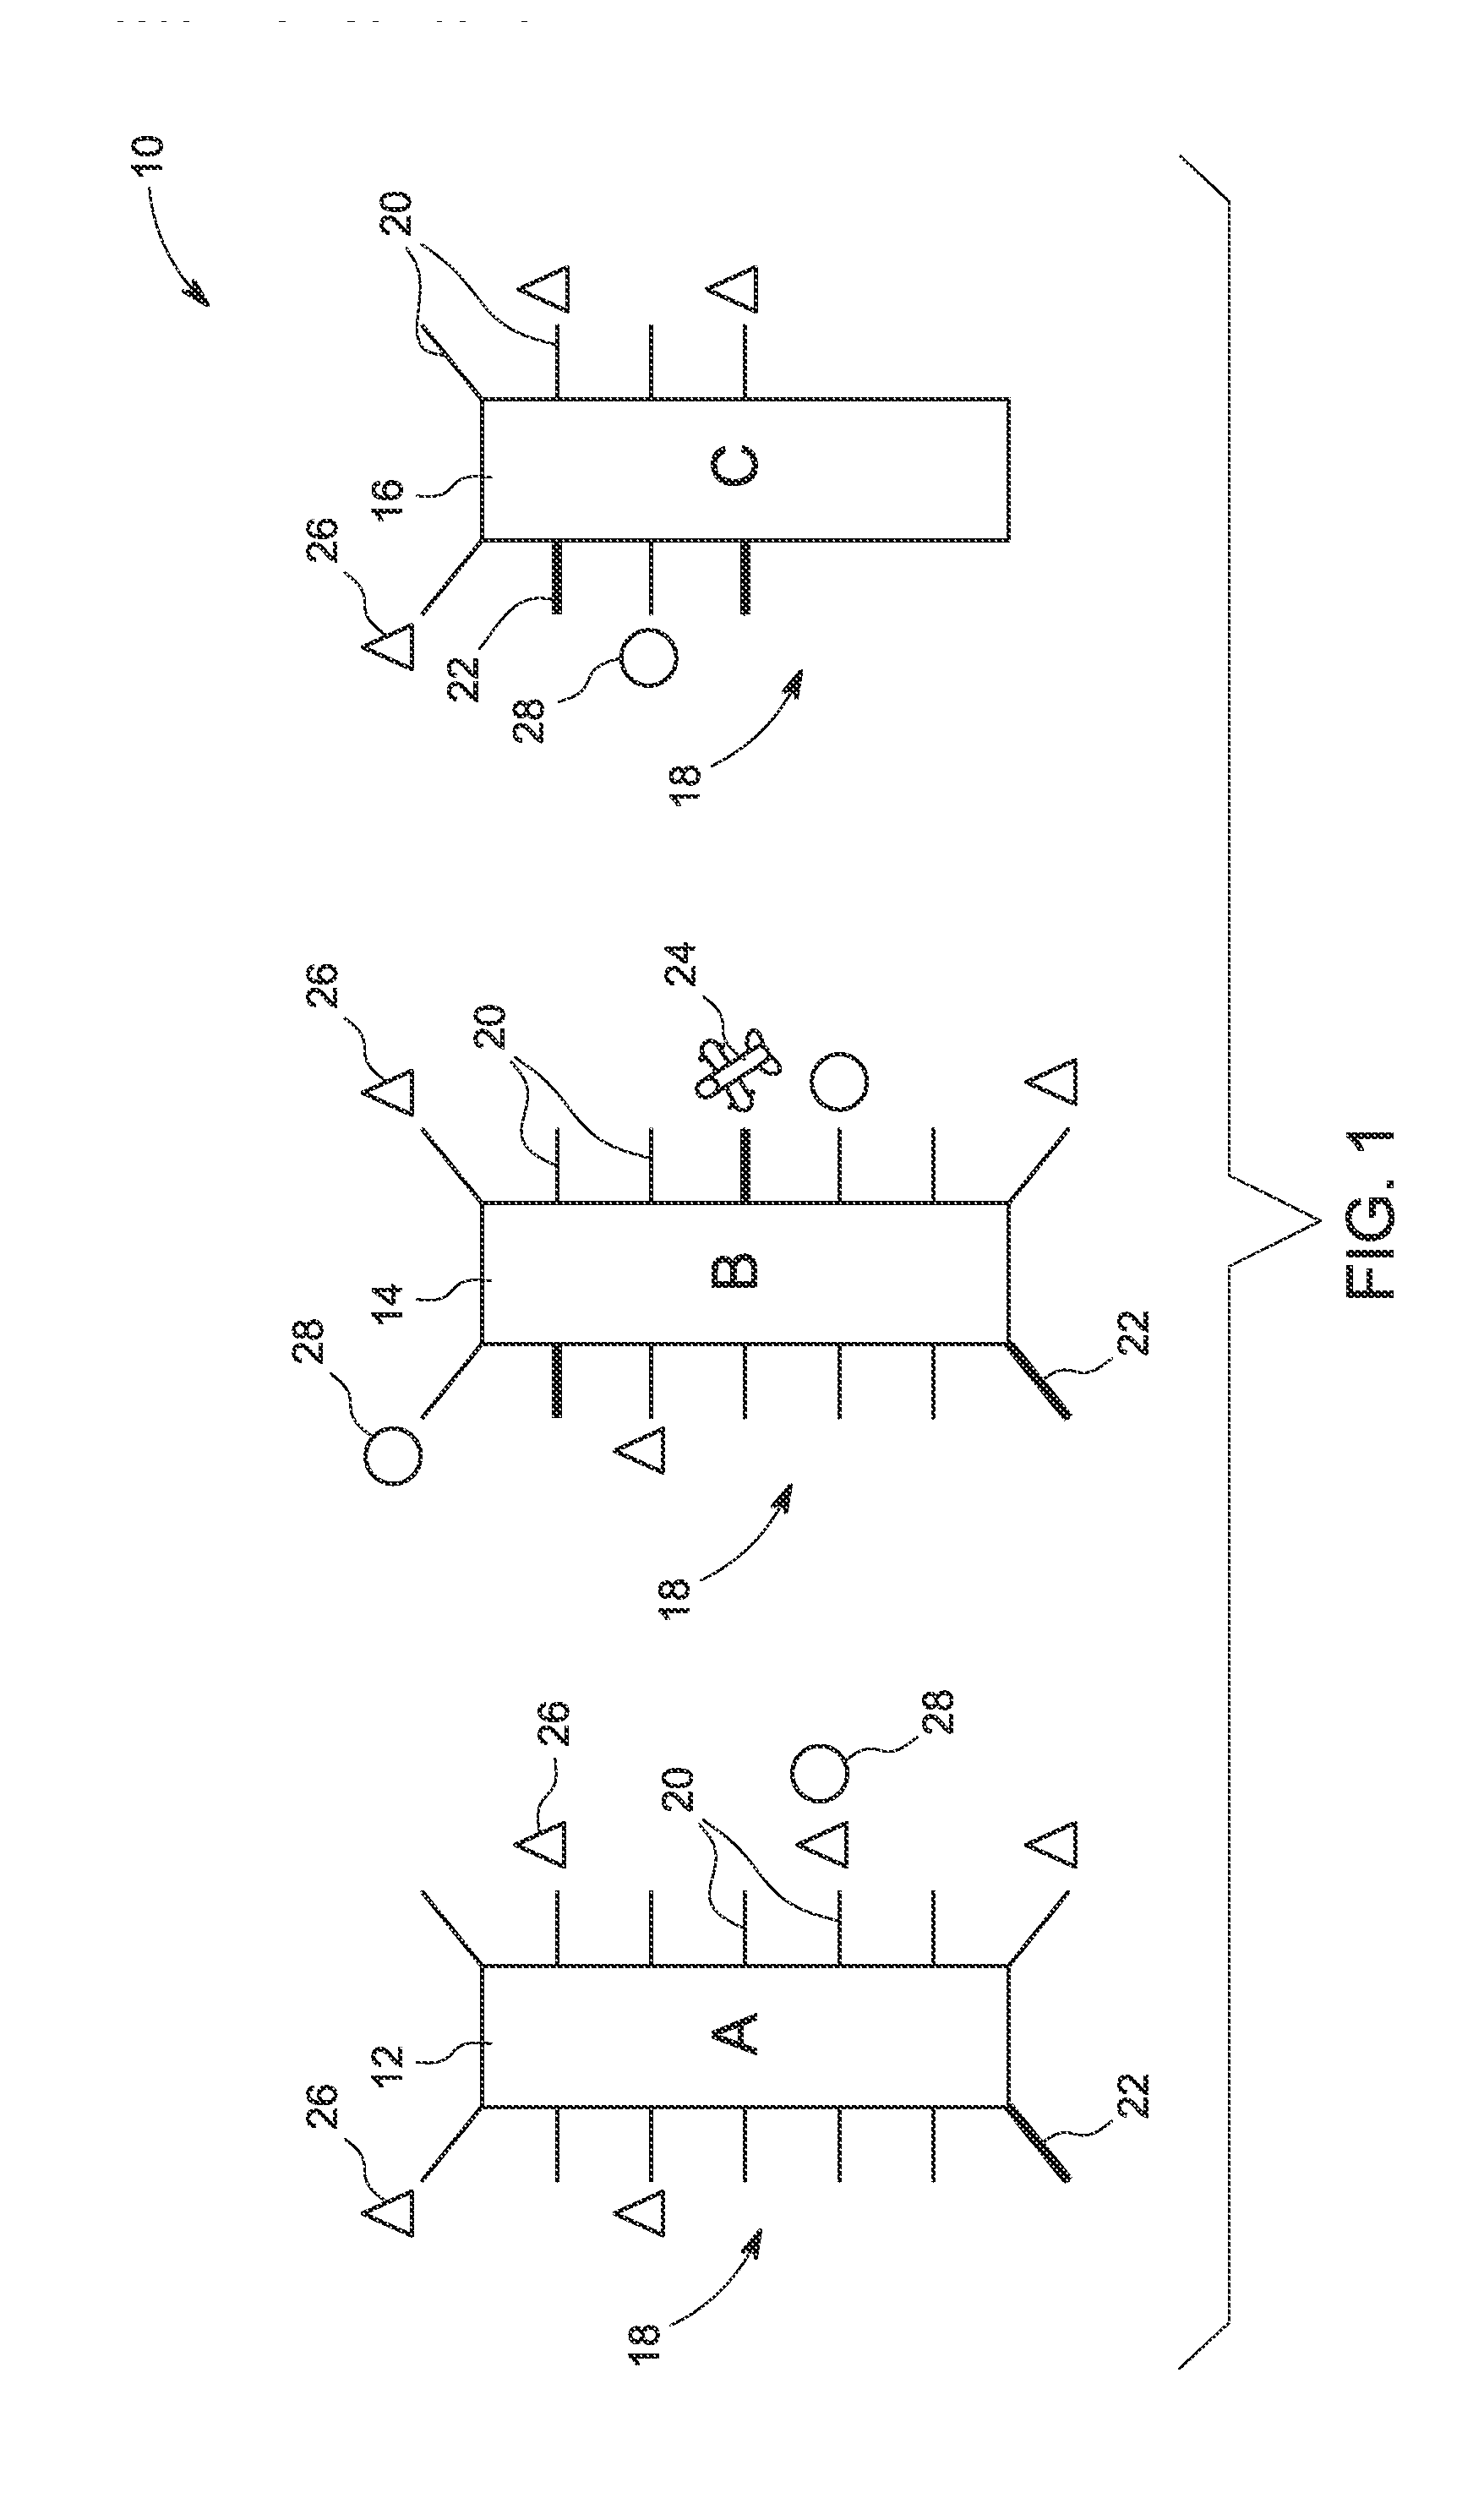 System and method for managing aircraft ground operations